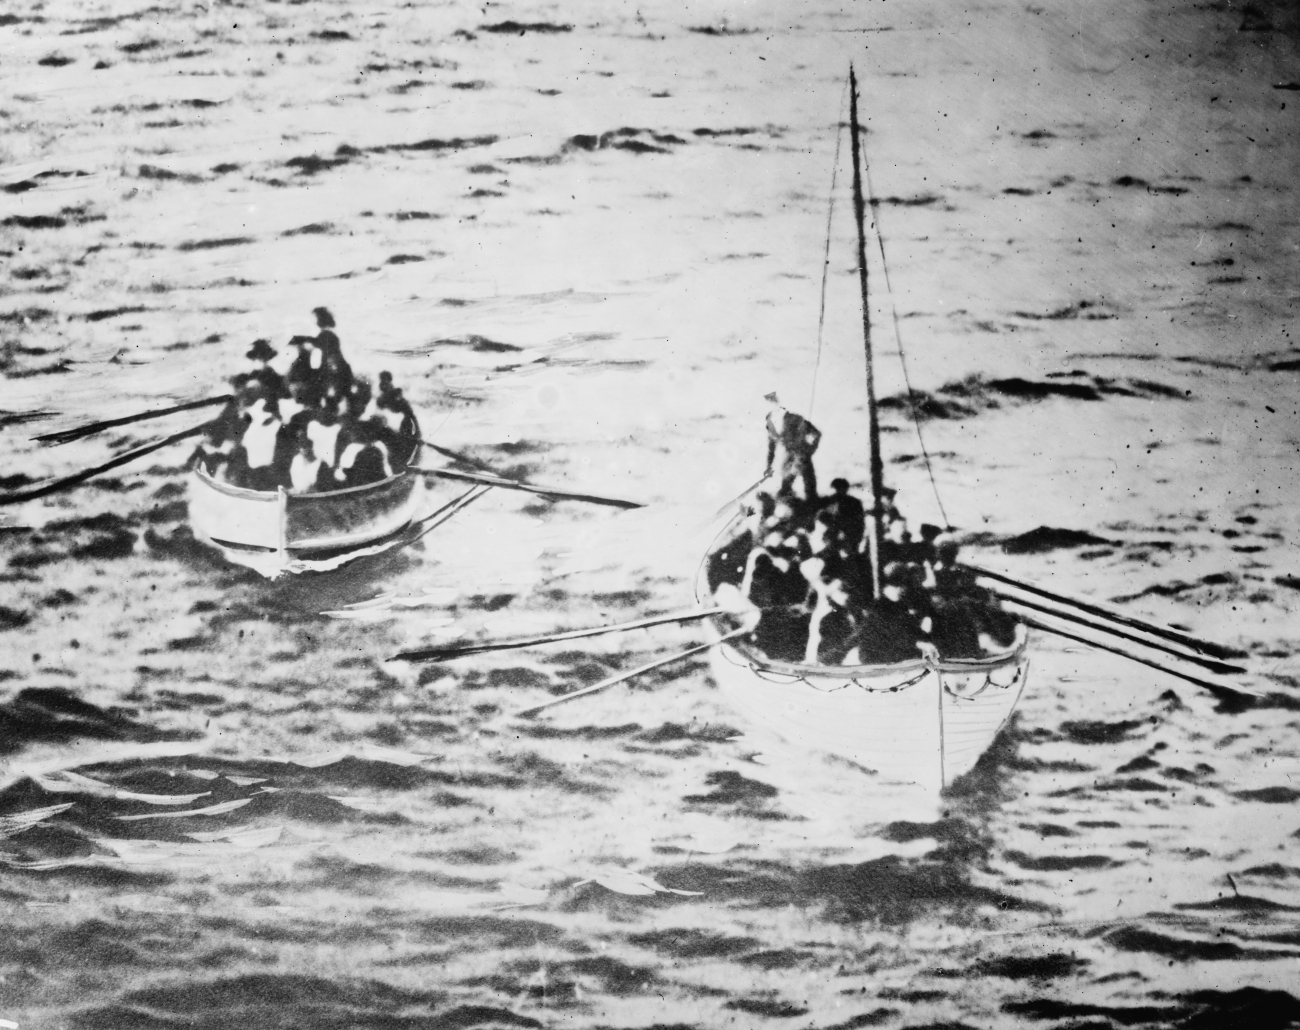 Titanic survivors on lifeboats as seen from the Carpathia